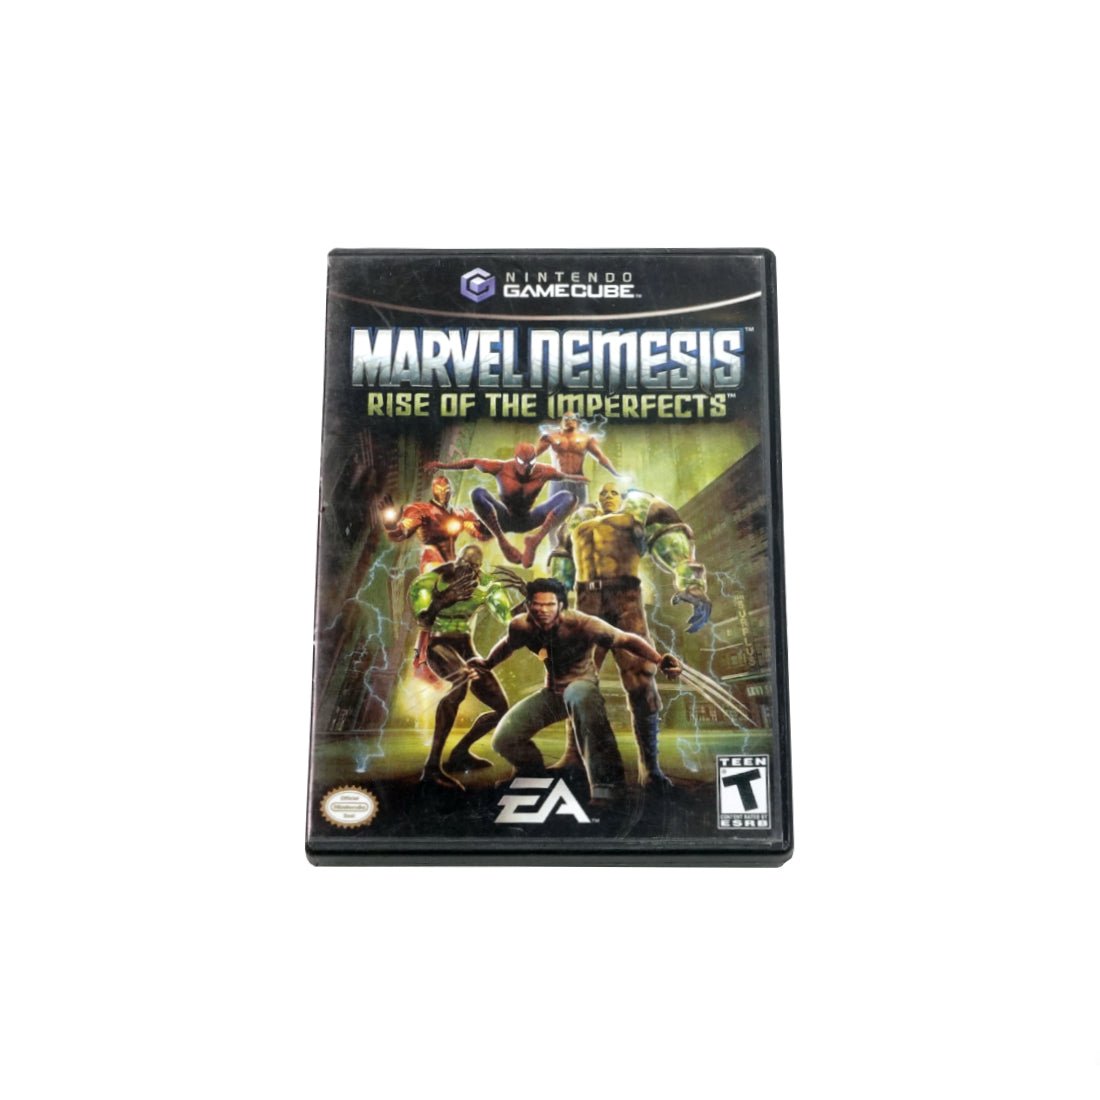 (Pre-Owned) Marvel Nemesis: Rise of the Imperfects - Nintendo Gamecube - Store 974 | ستور ٩٧٤